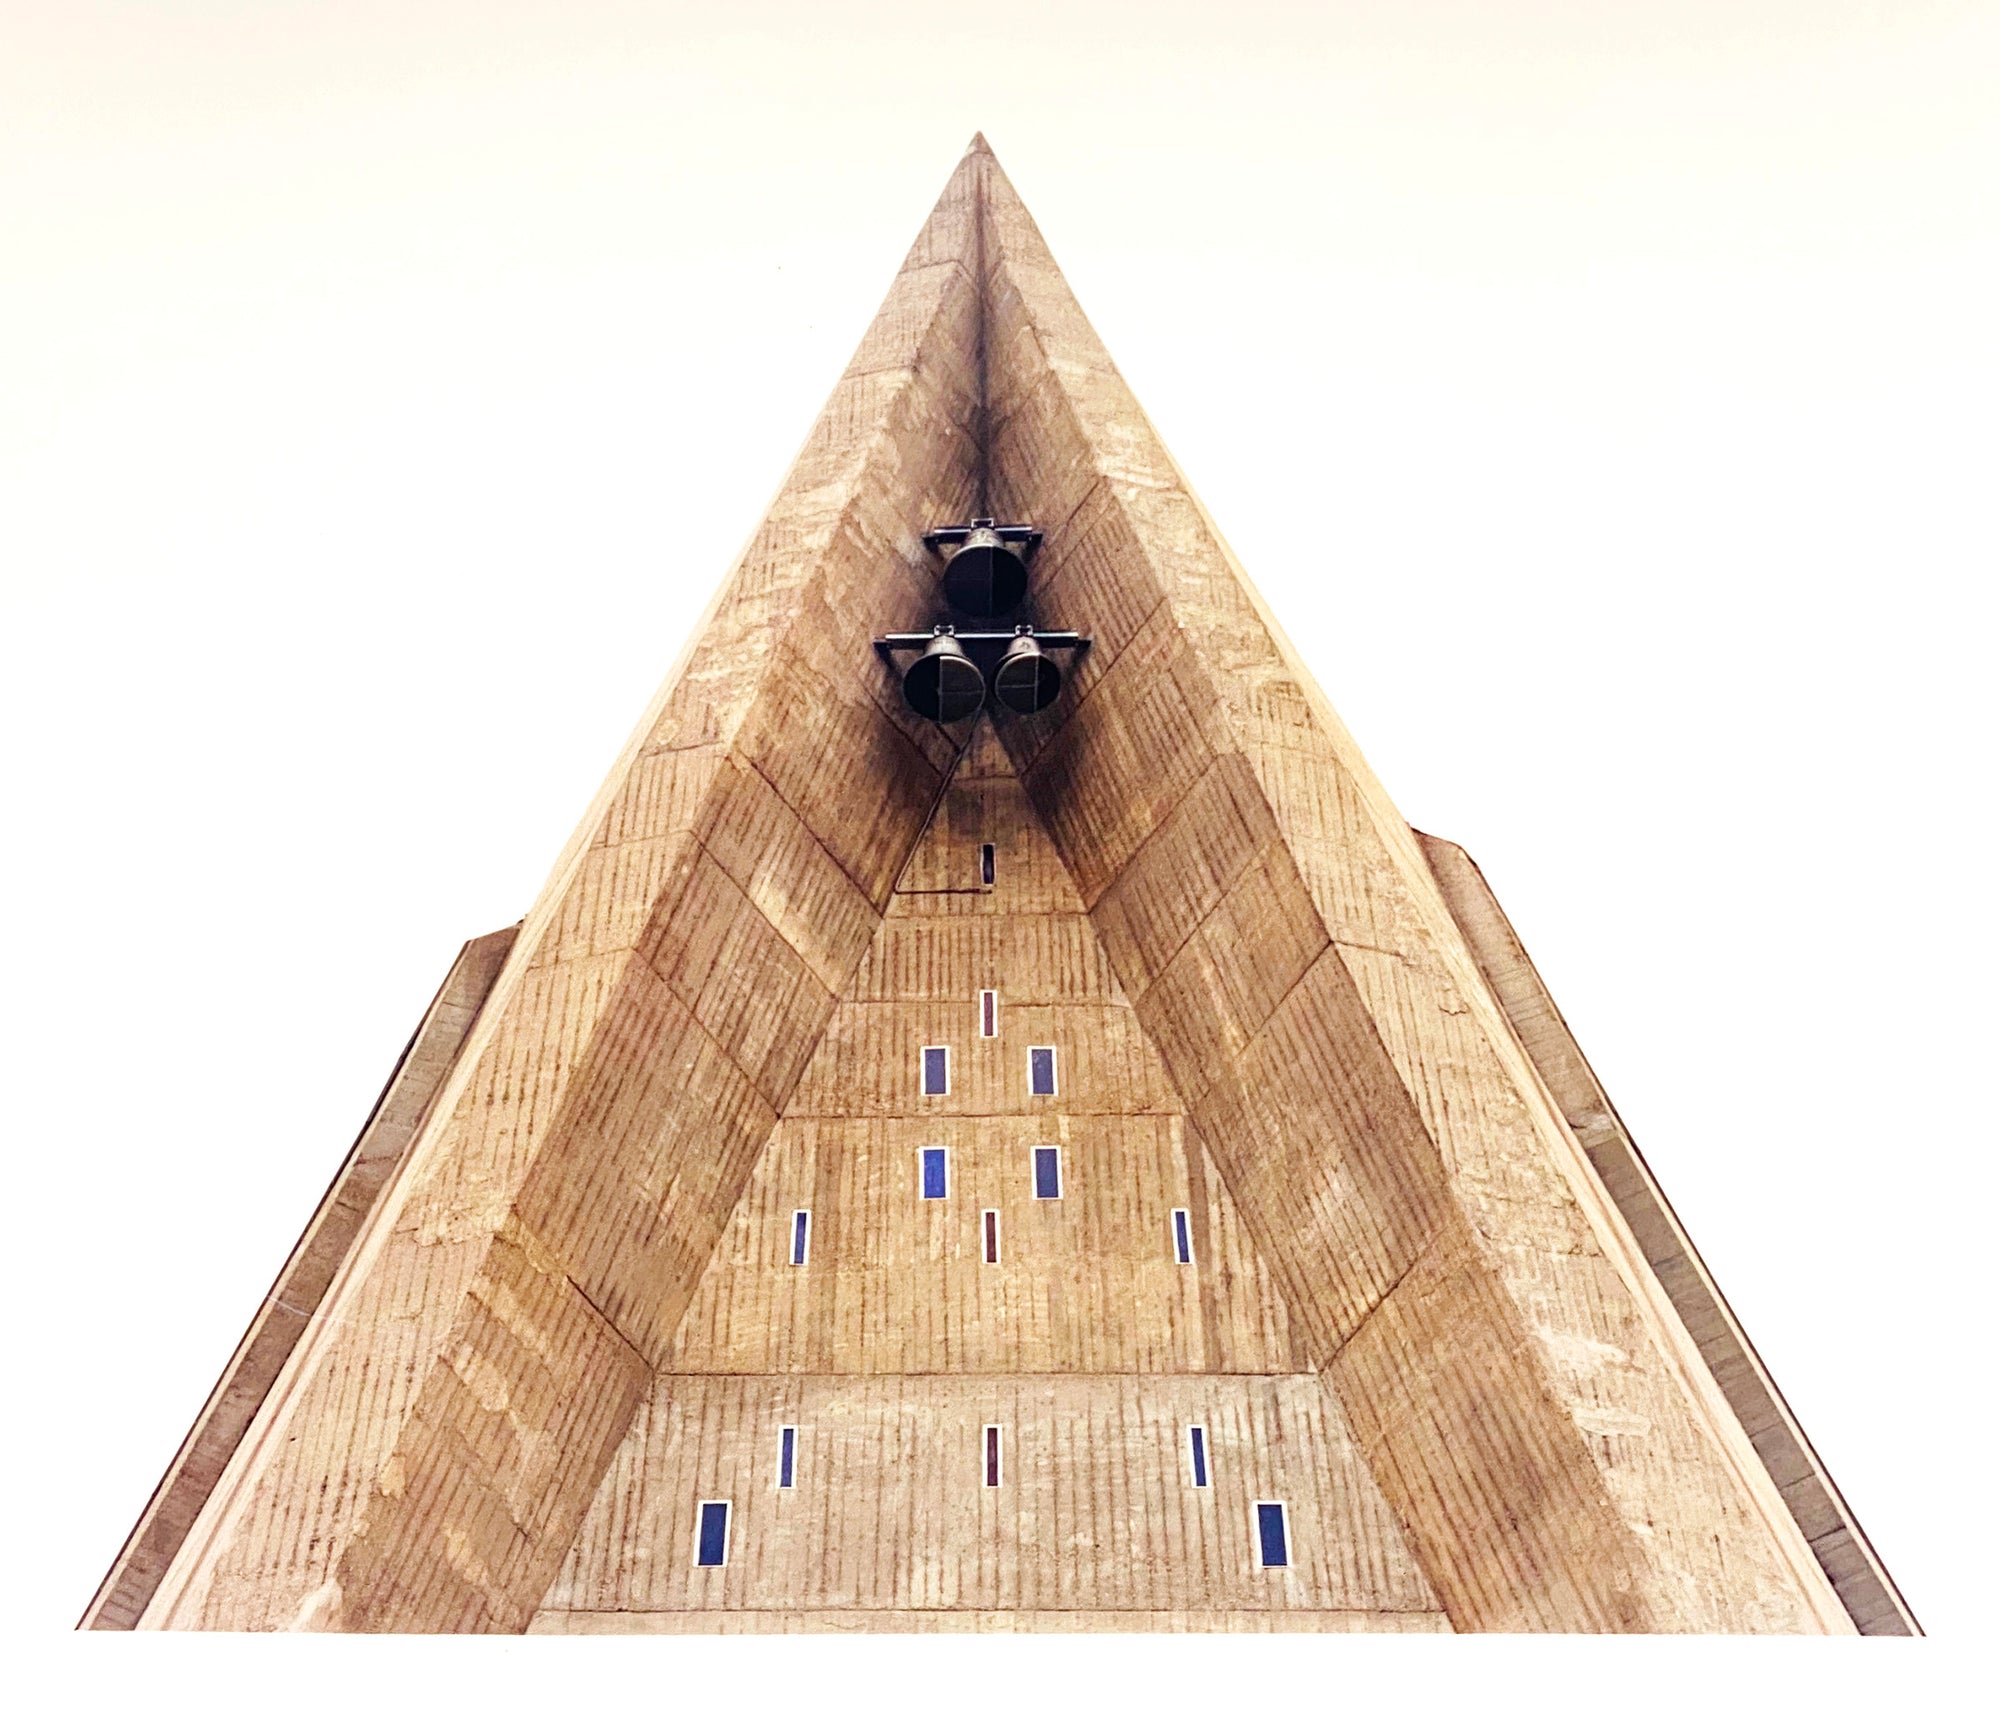 'Bell Tower, Chiesa San Giovanni Bono, Milan', part of Richard Heeps' series 'A Short History of Milan' which began in November 2018 for a special project featured at the Affordable Art Fair Milan 2019. There is a reoccurring linear, structural theme throughout the series, capturing the Milanese use of materials in design such as glass, metal, wood and stone.